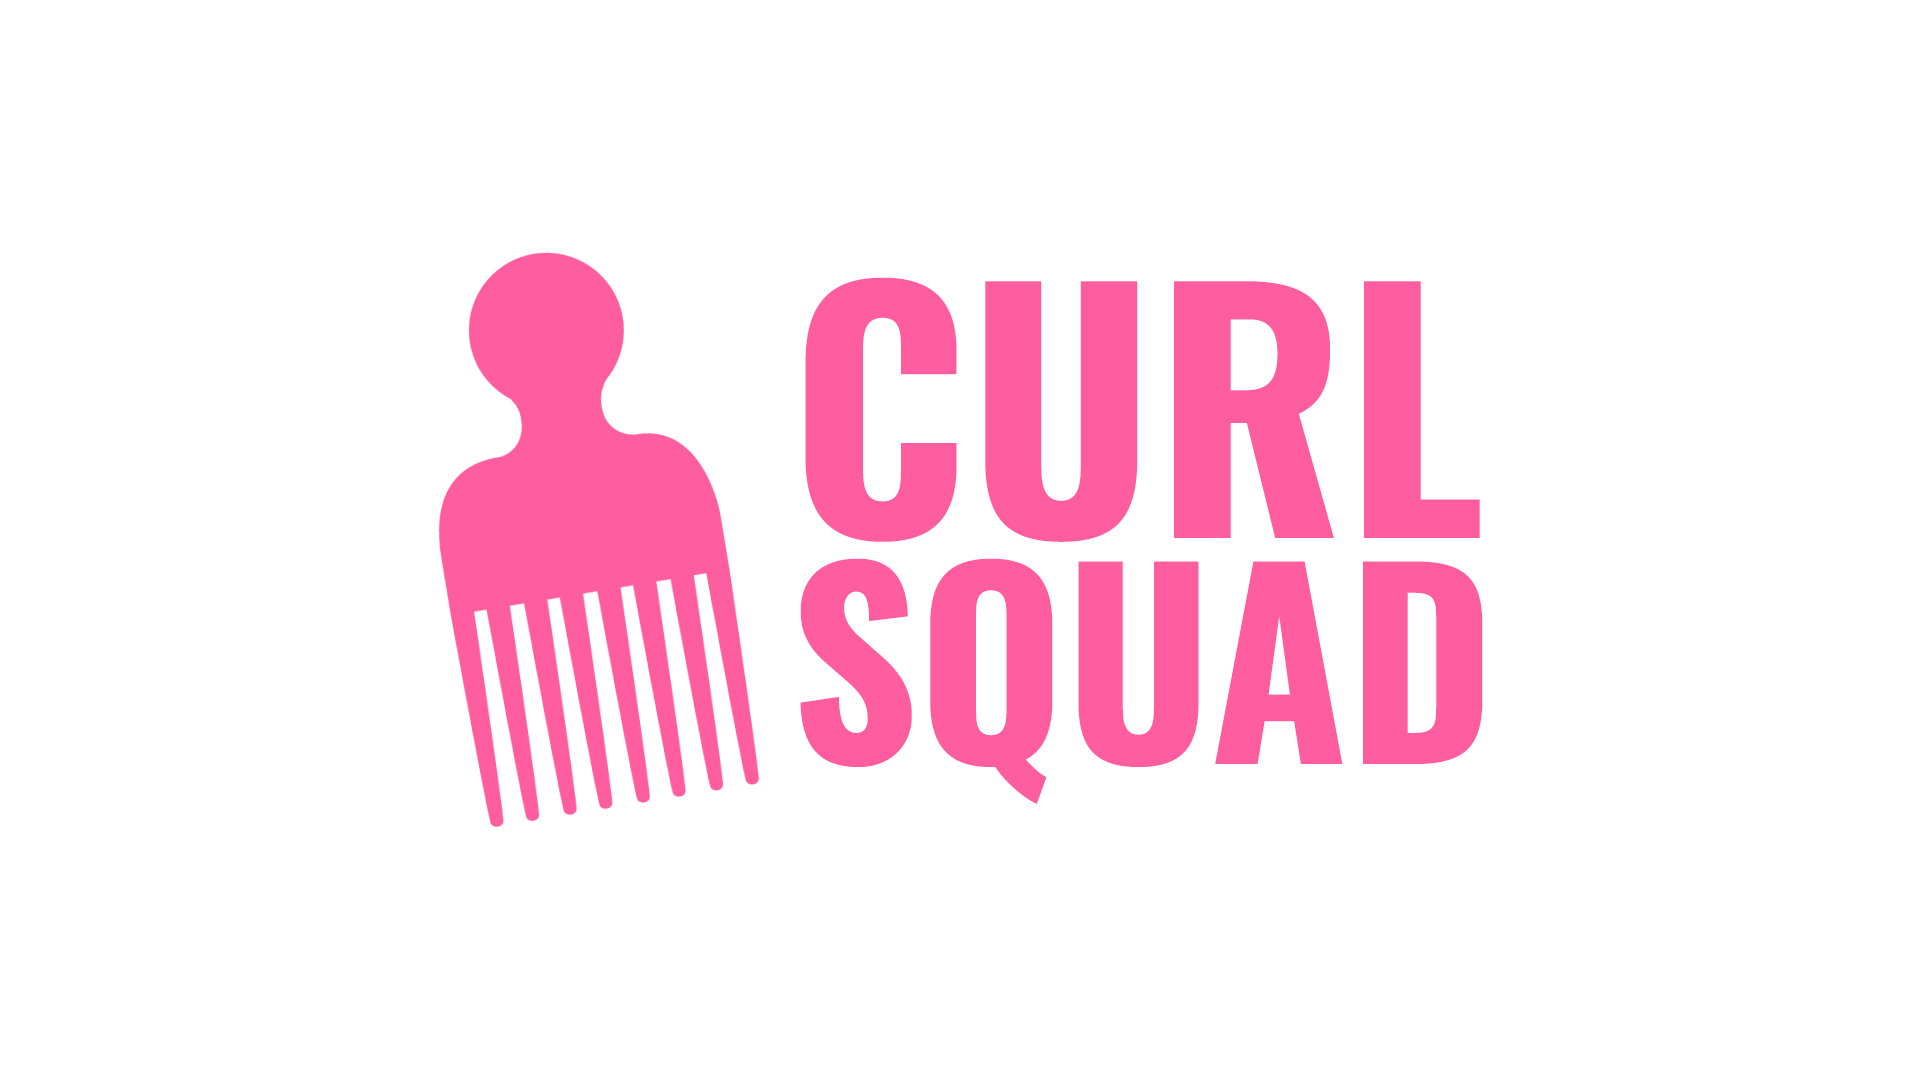 The Curl Squad